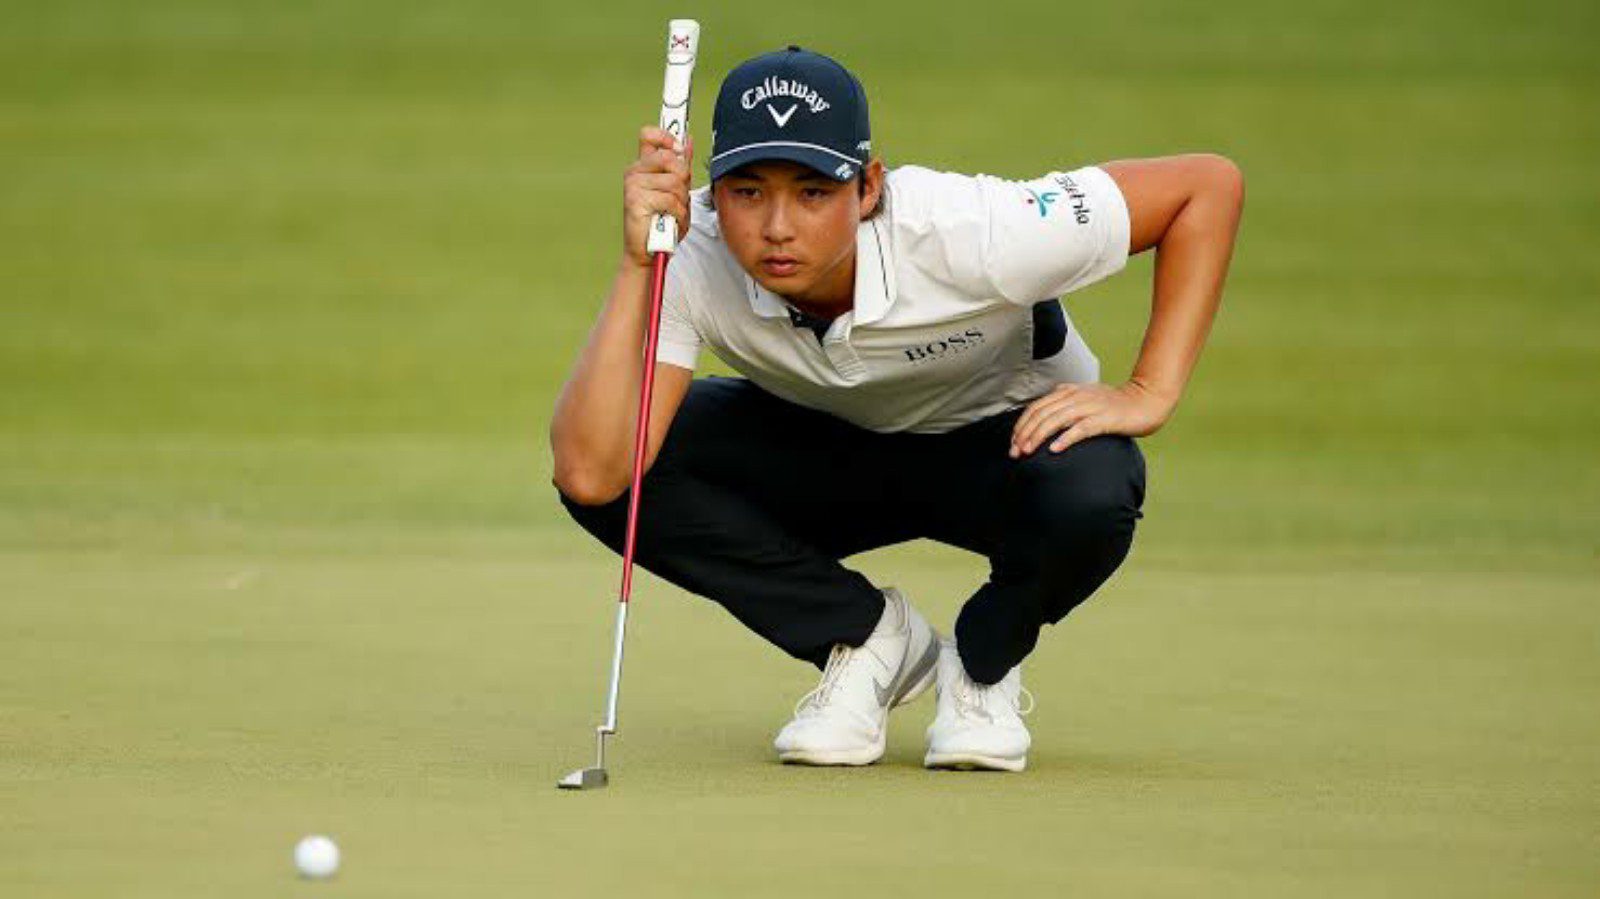 Min Woo Lee's Net Worth How Much Does The Professional Golf Player